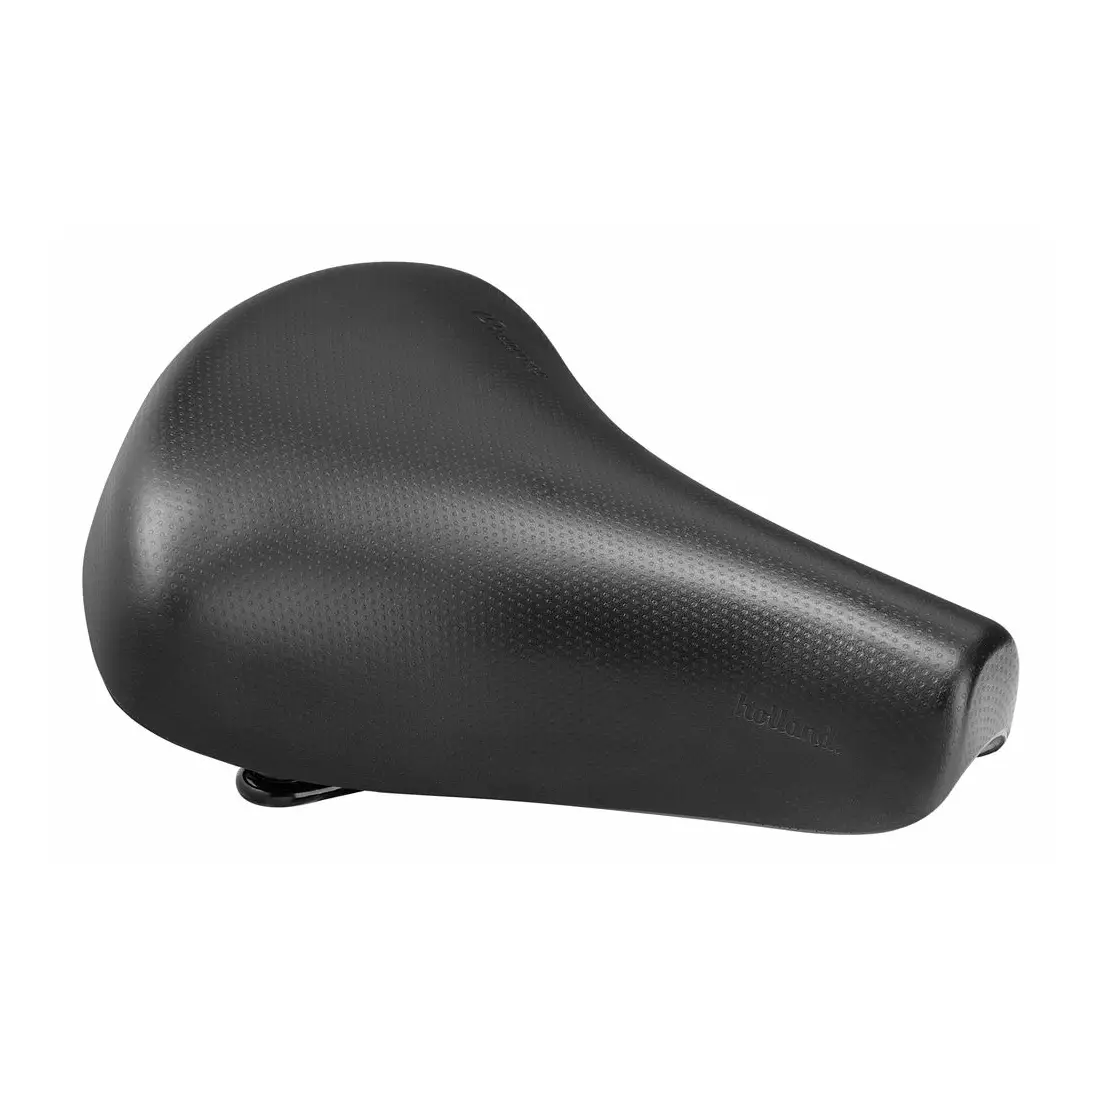 SELLEROYAL bicycle saddle classic relaxed holland unitech SR-3061US0A12010